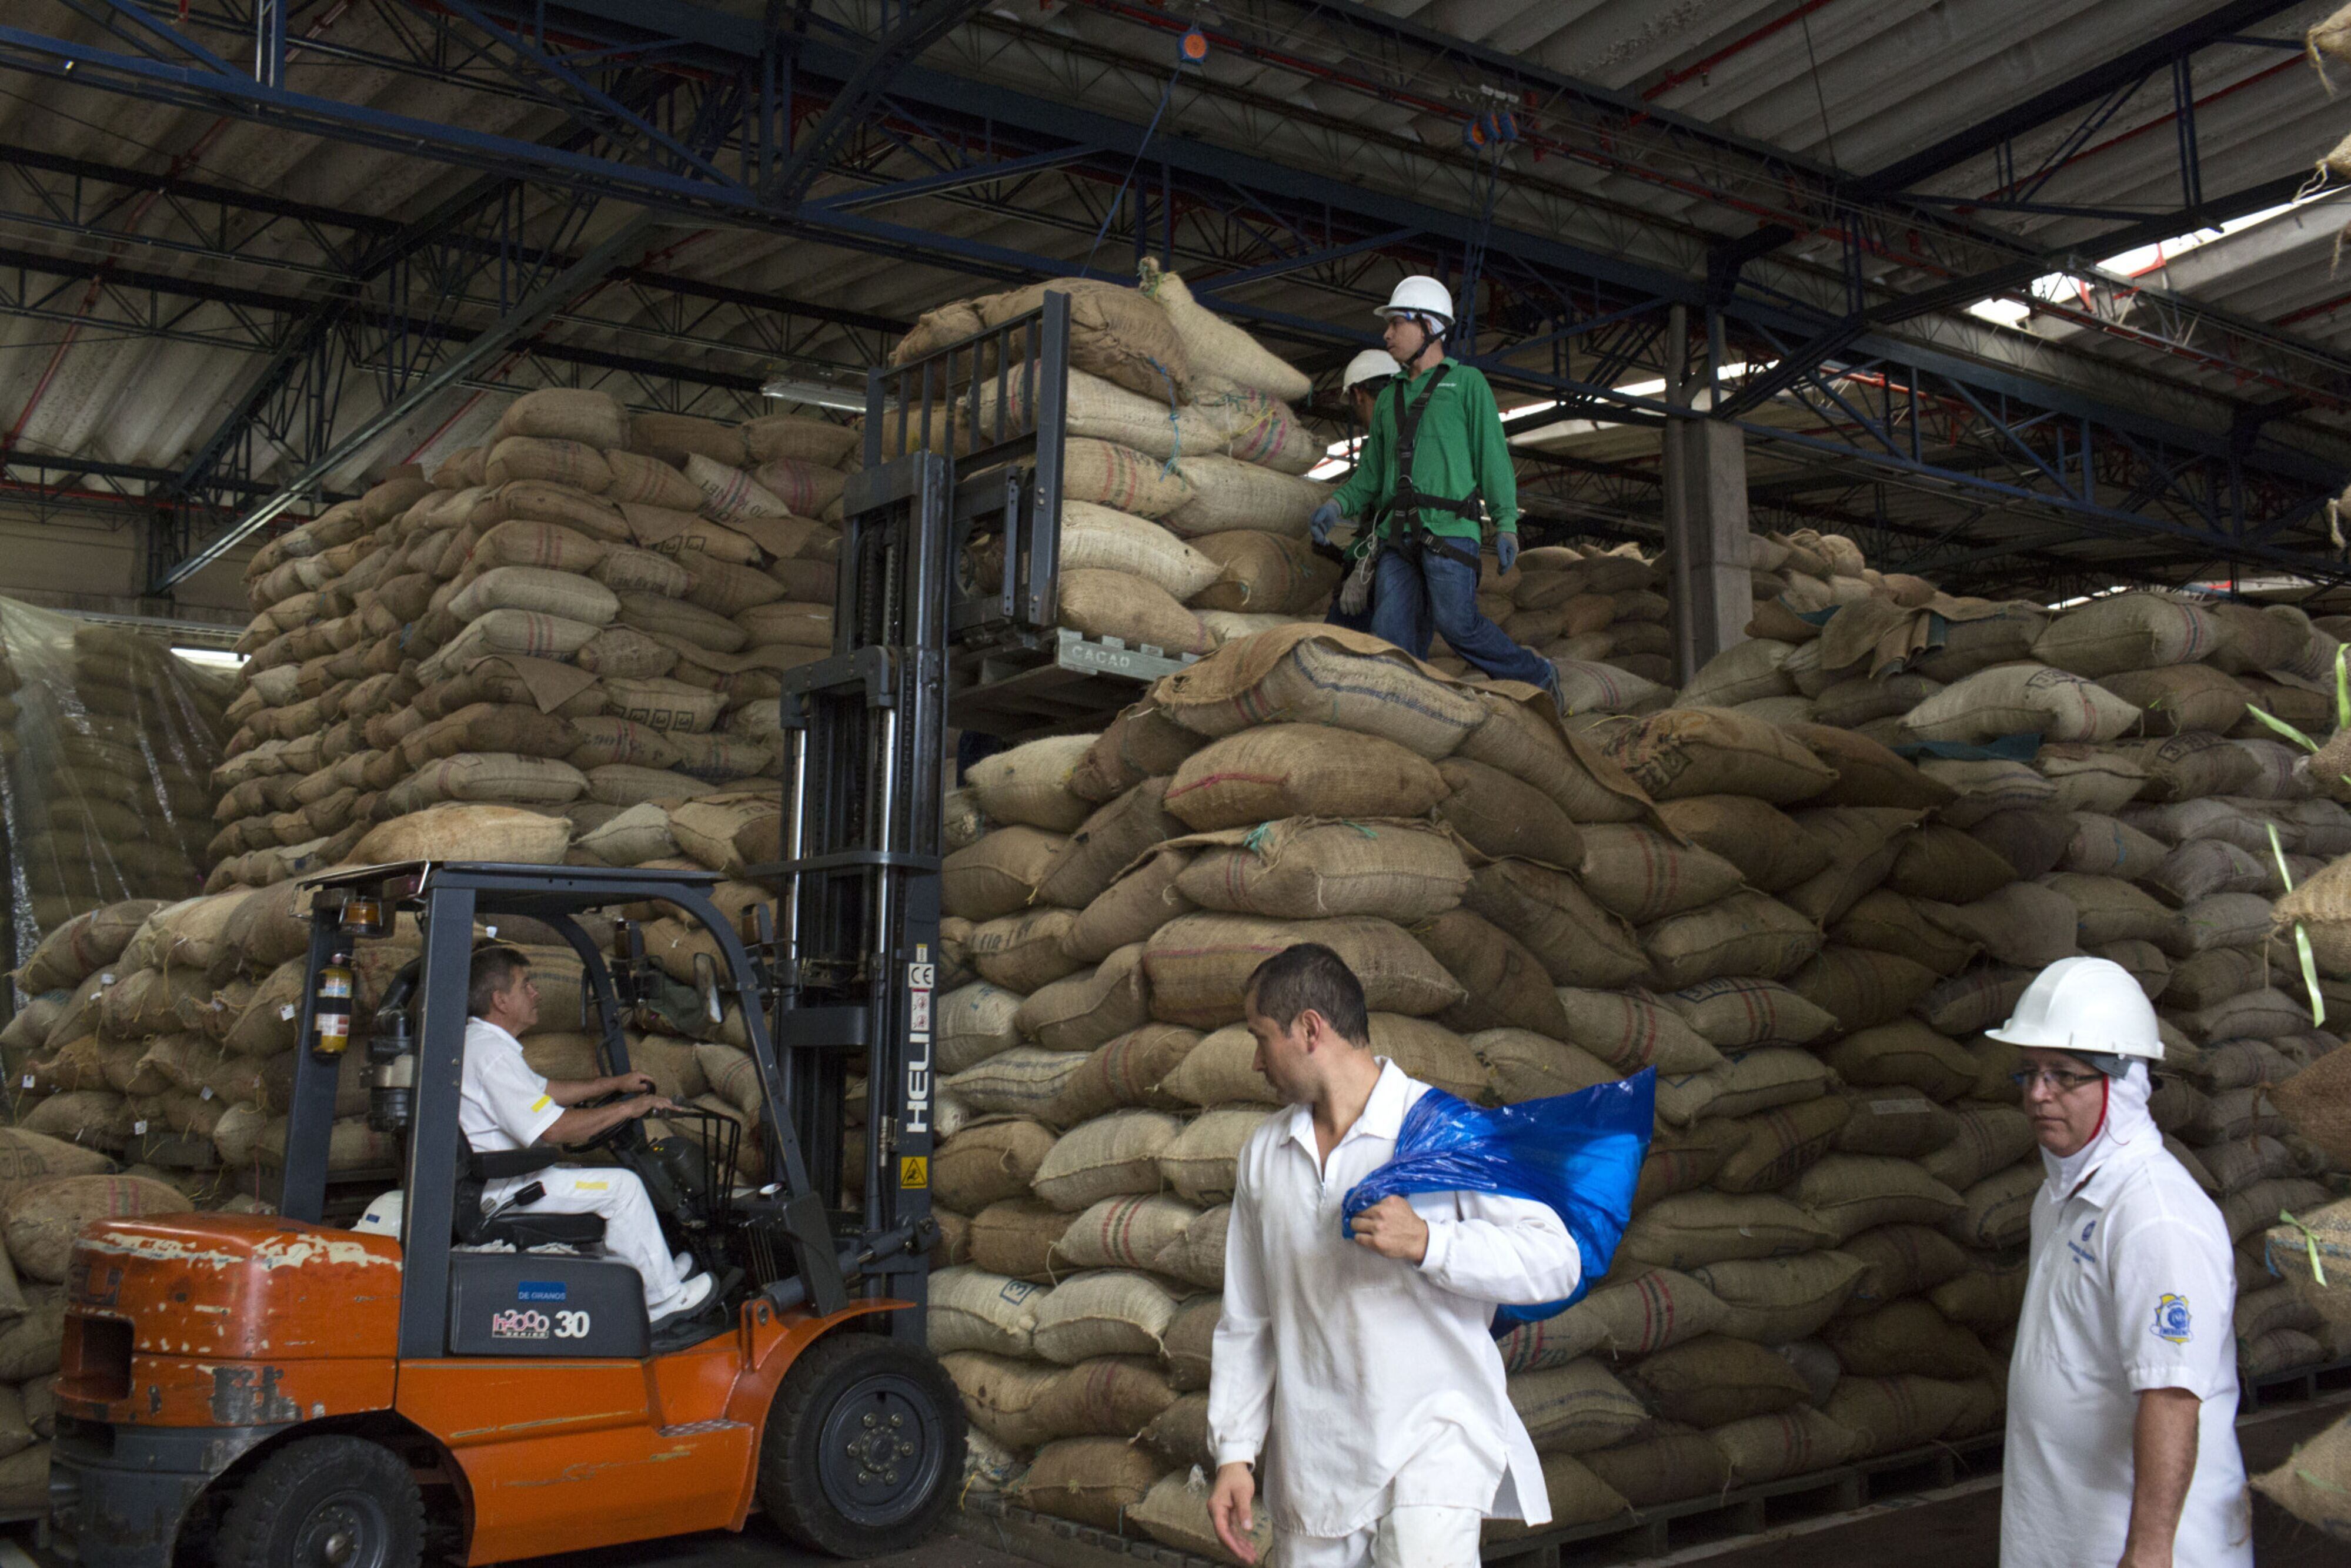 Workers at the Grupo Nutresa chocolate factory load bags of cocoa beans; June 2017.